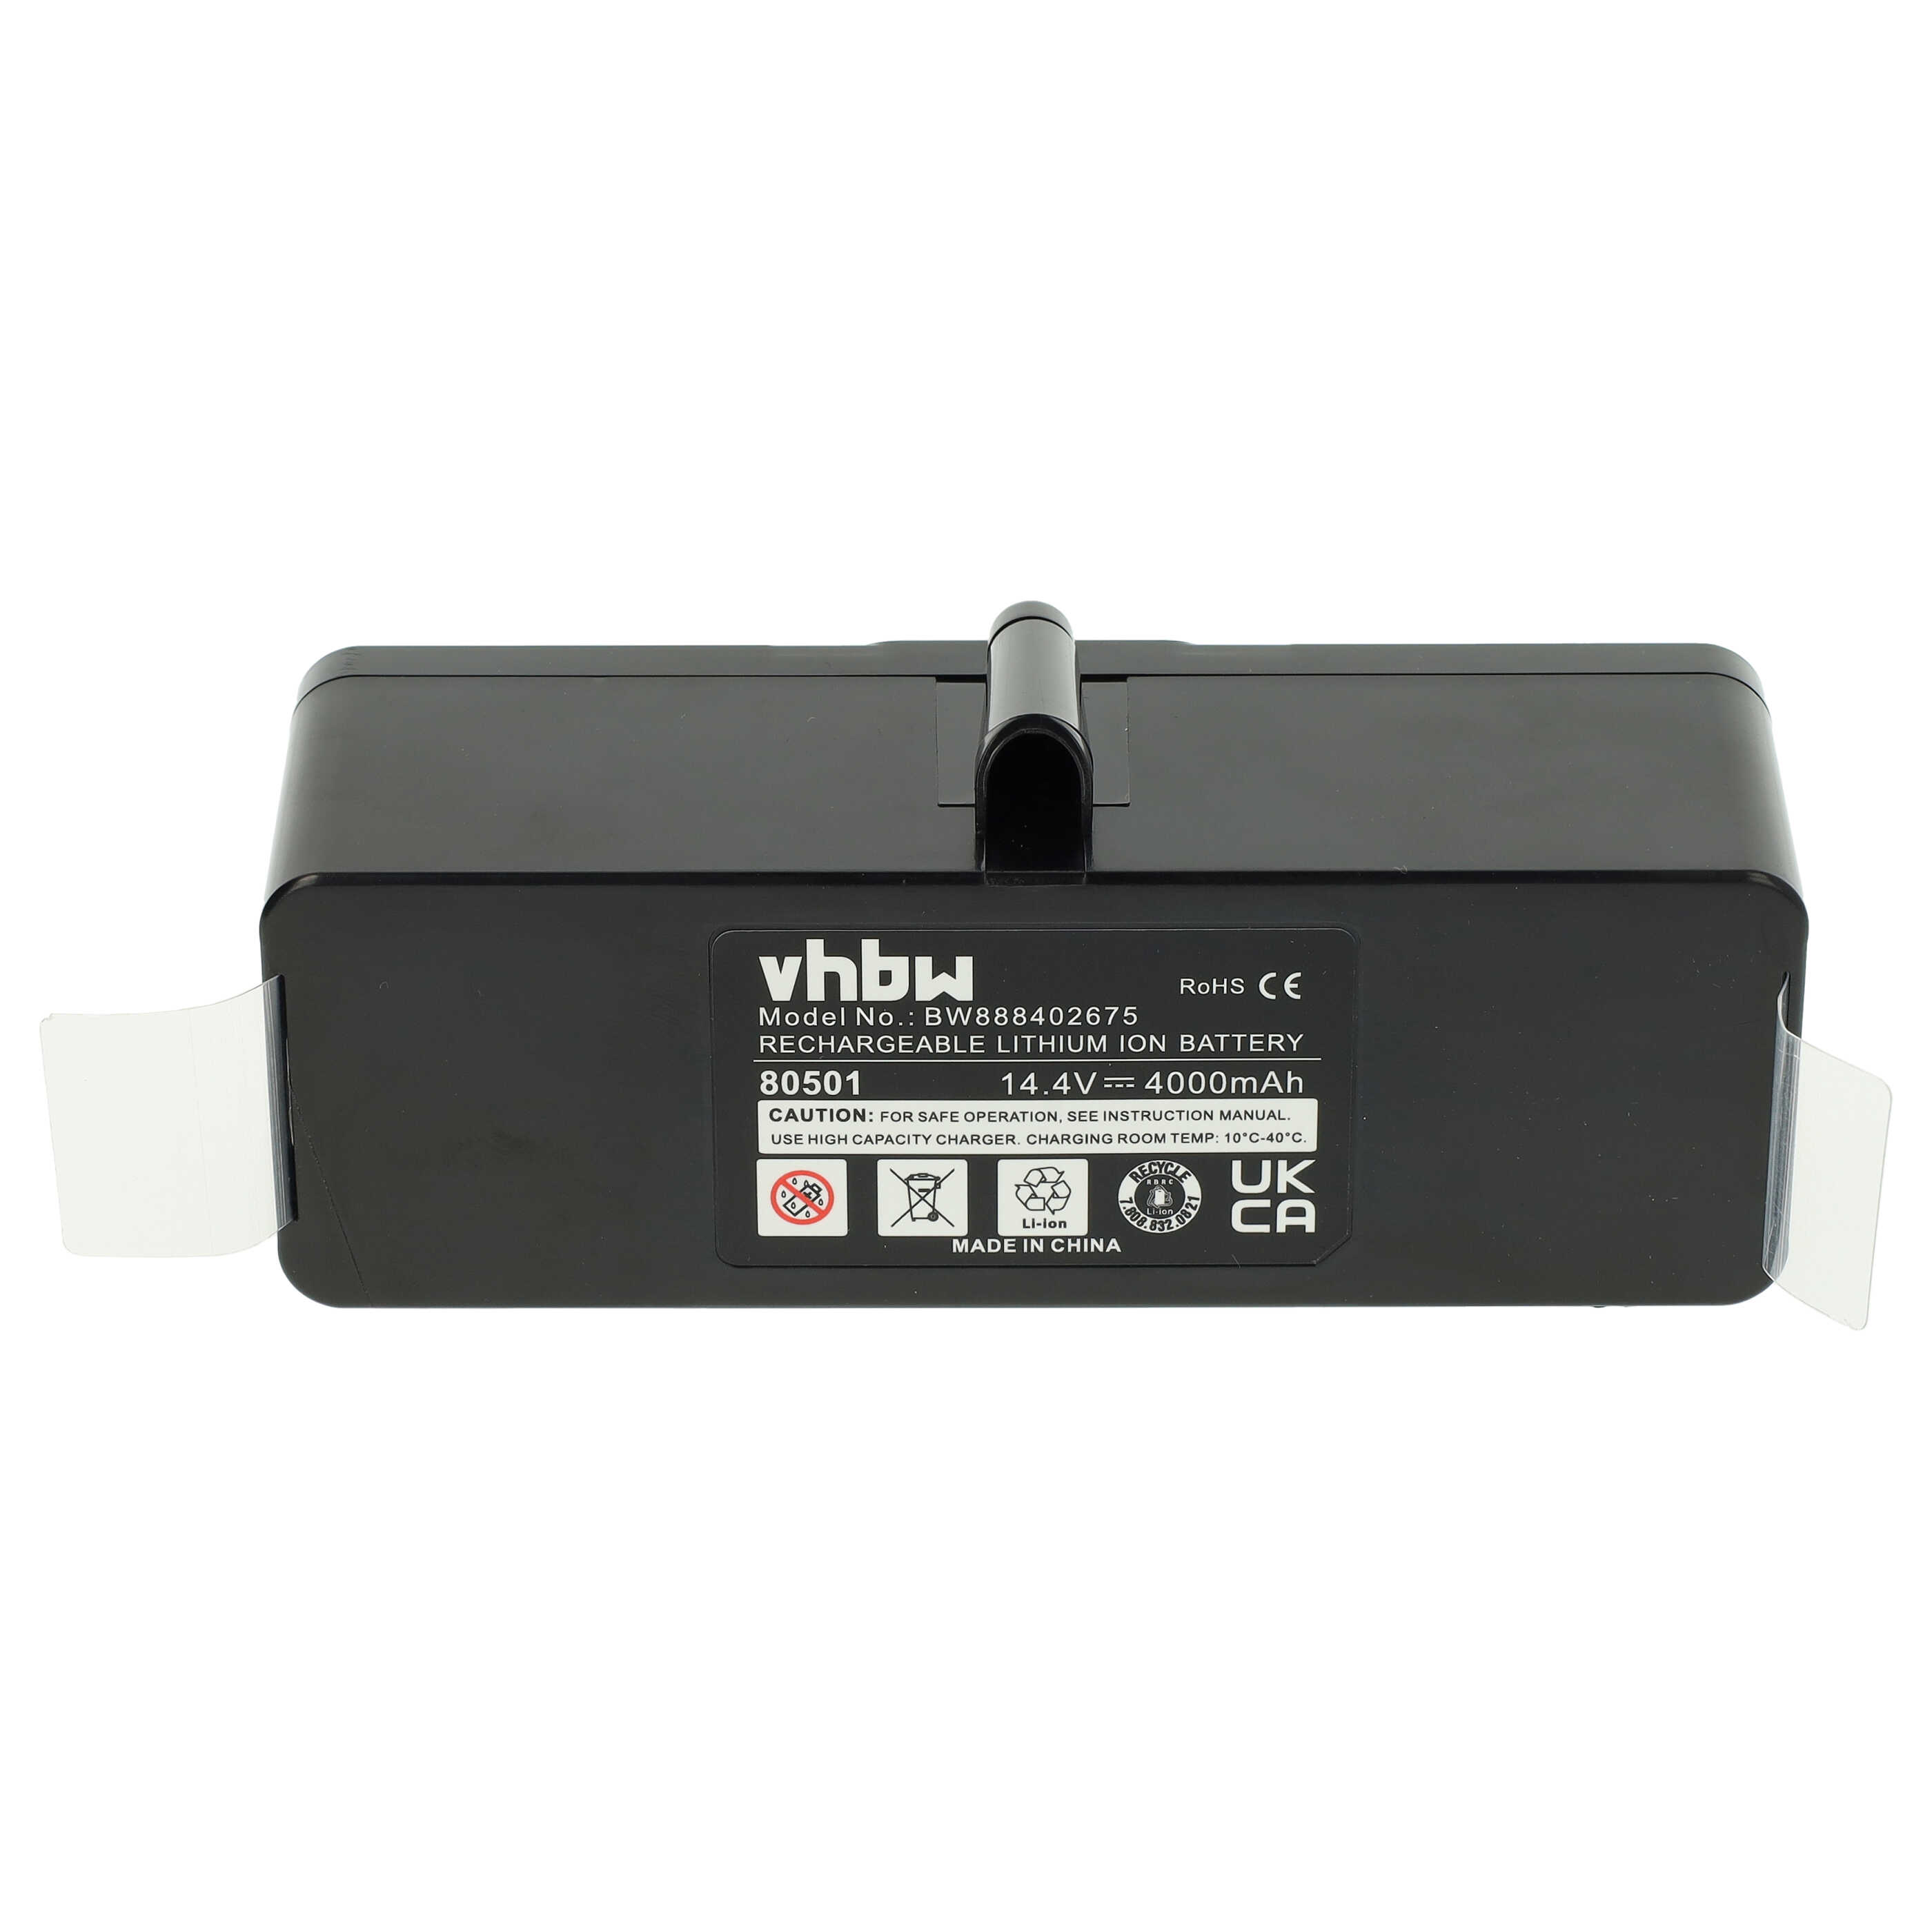 Battery Replacement for 80501e, 80601, 11702, 68939, 80501, 855714, 4419696 for - 4000mAh, 14.4V, Li-Ion